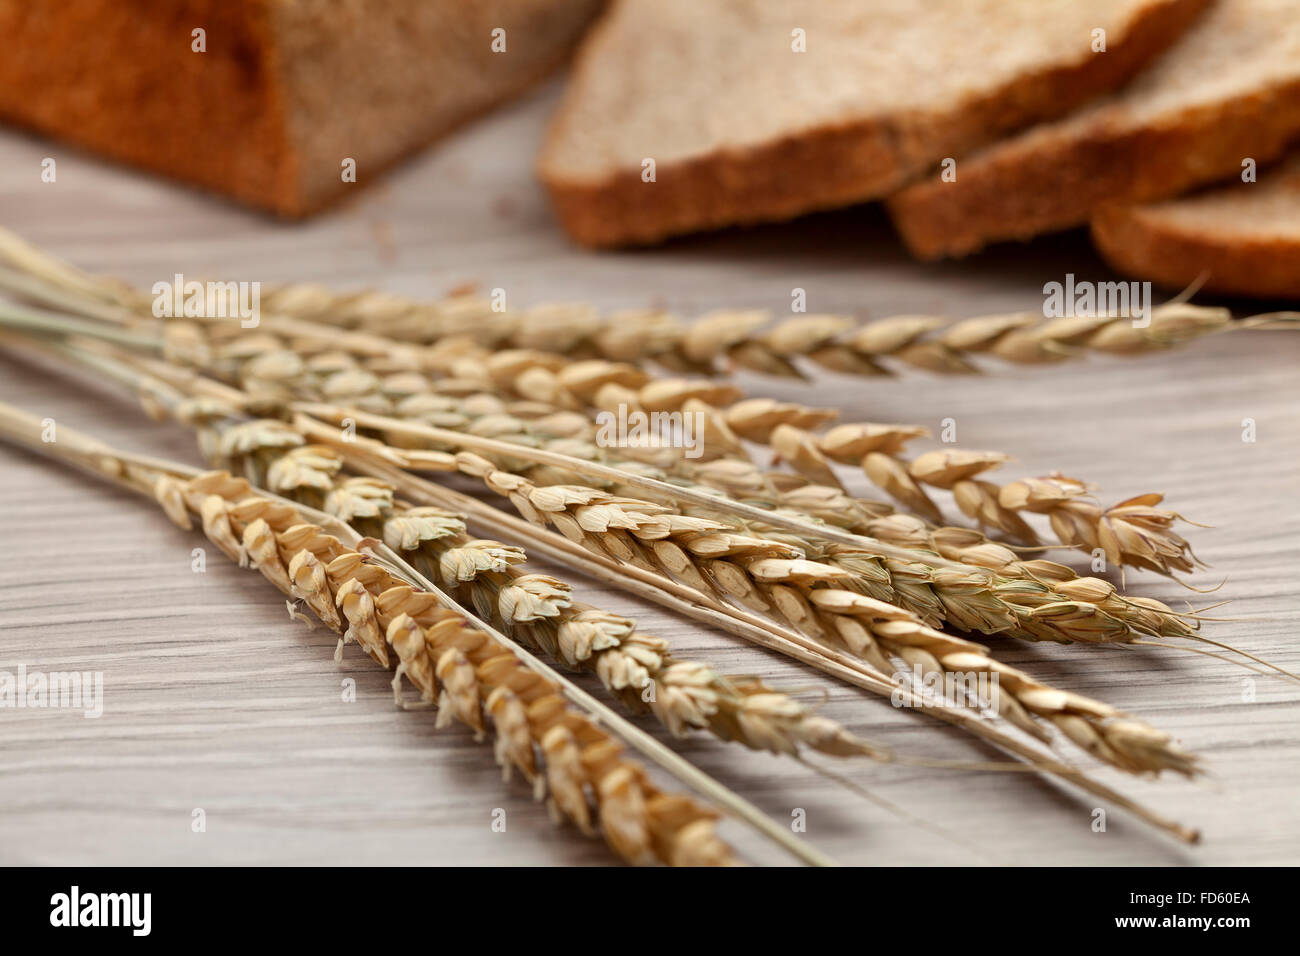 Dried spelt close up with peasant bread Stock Photo